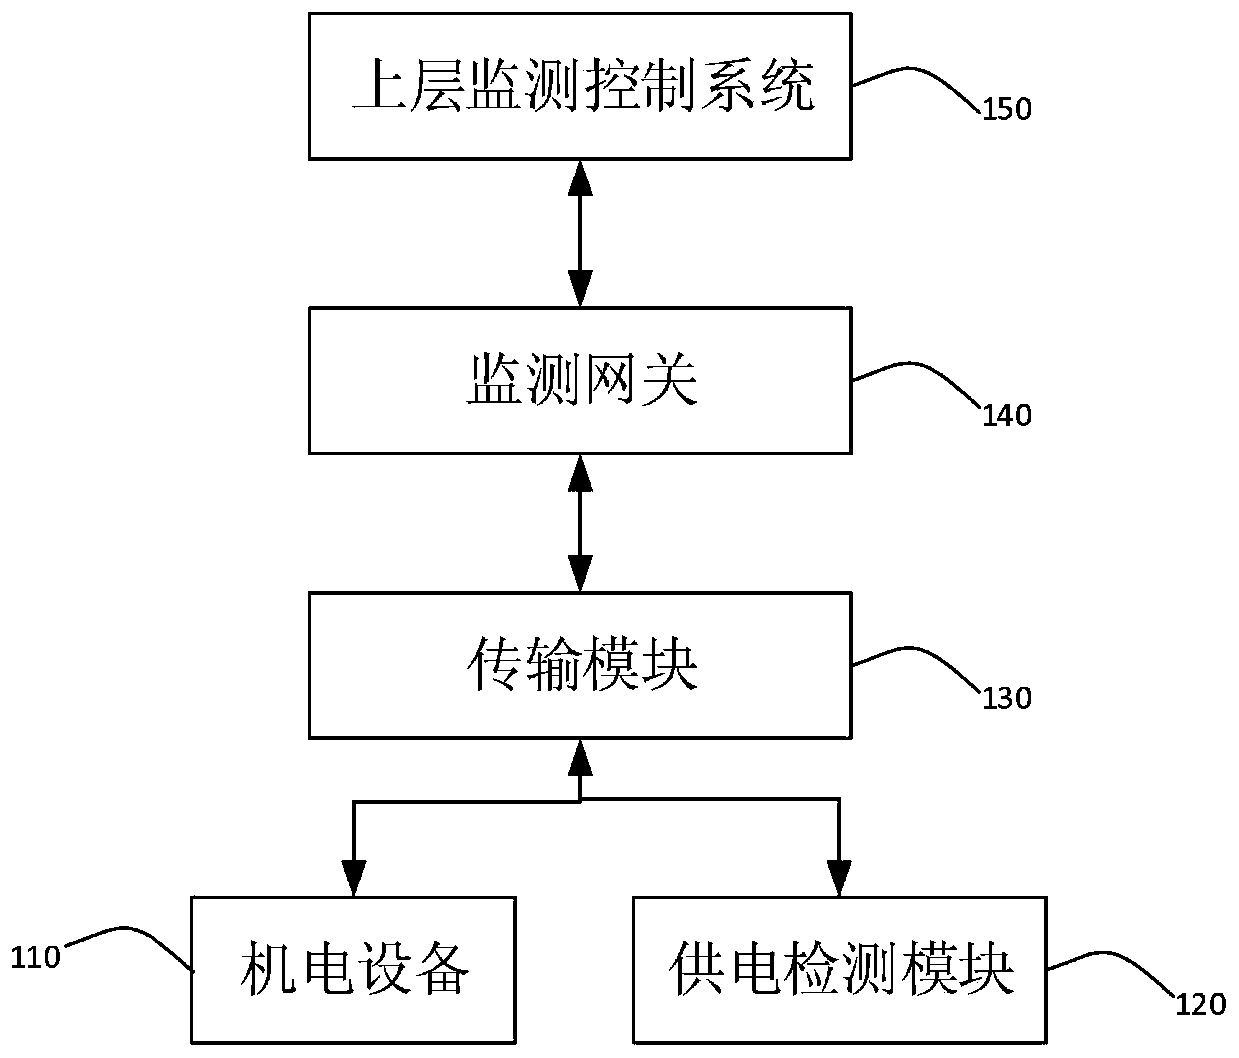 Highway tunnel electromechanical equipment monitoring system and method